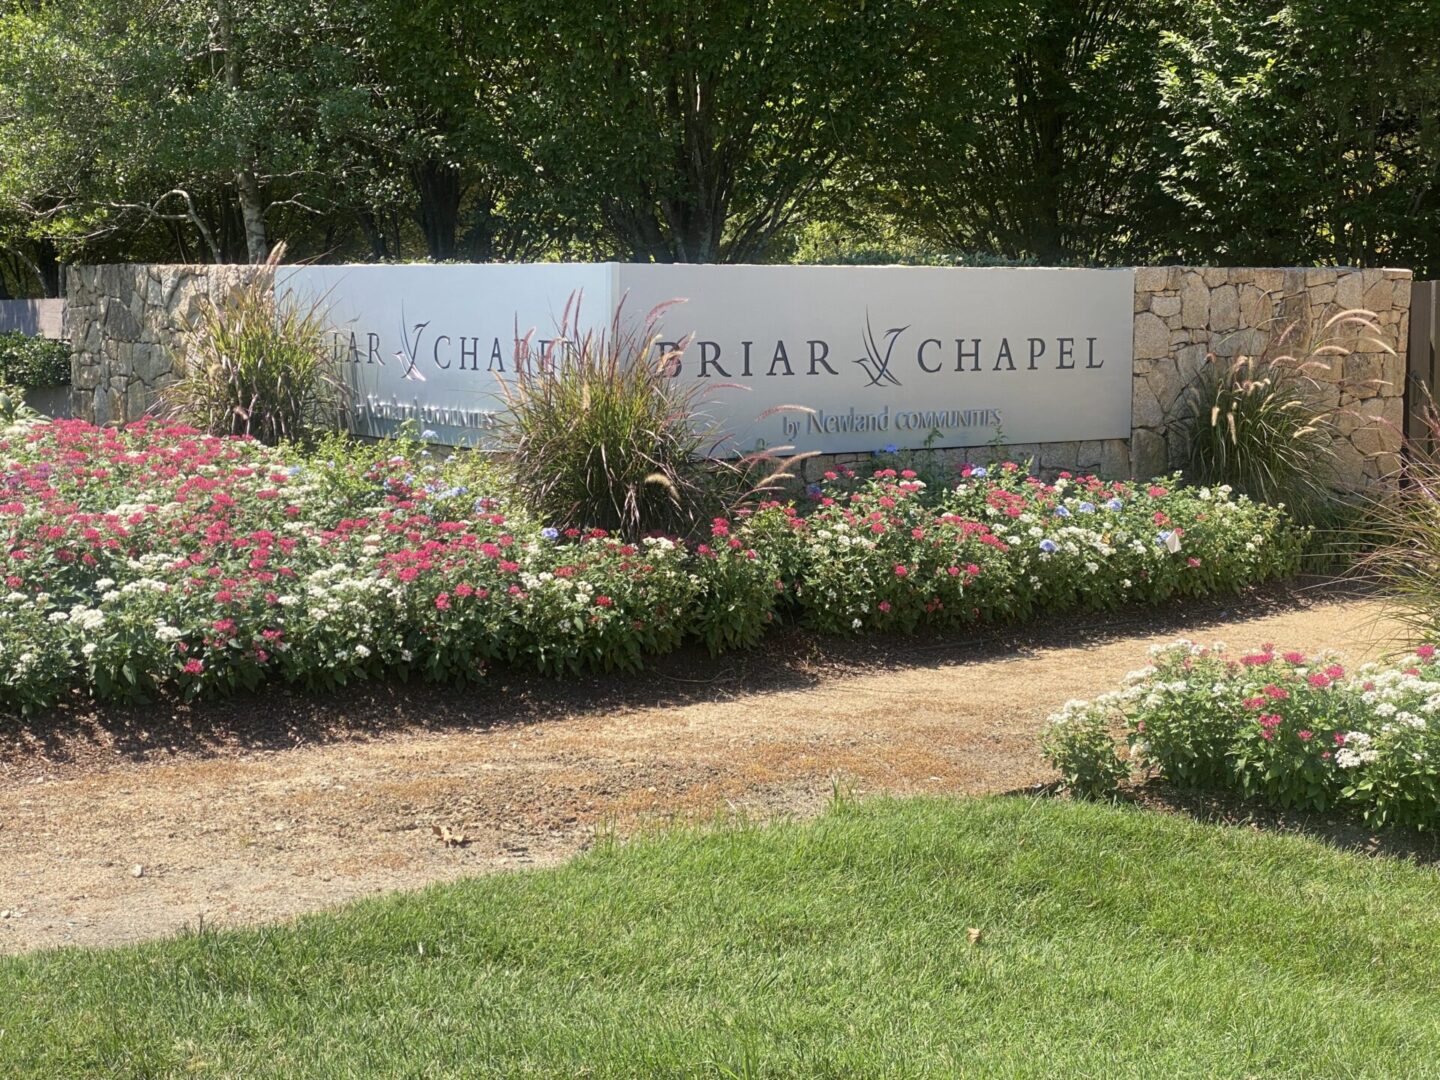 Signage of the Wall for Briar Chapel